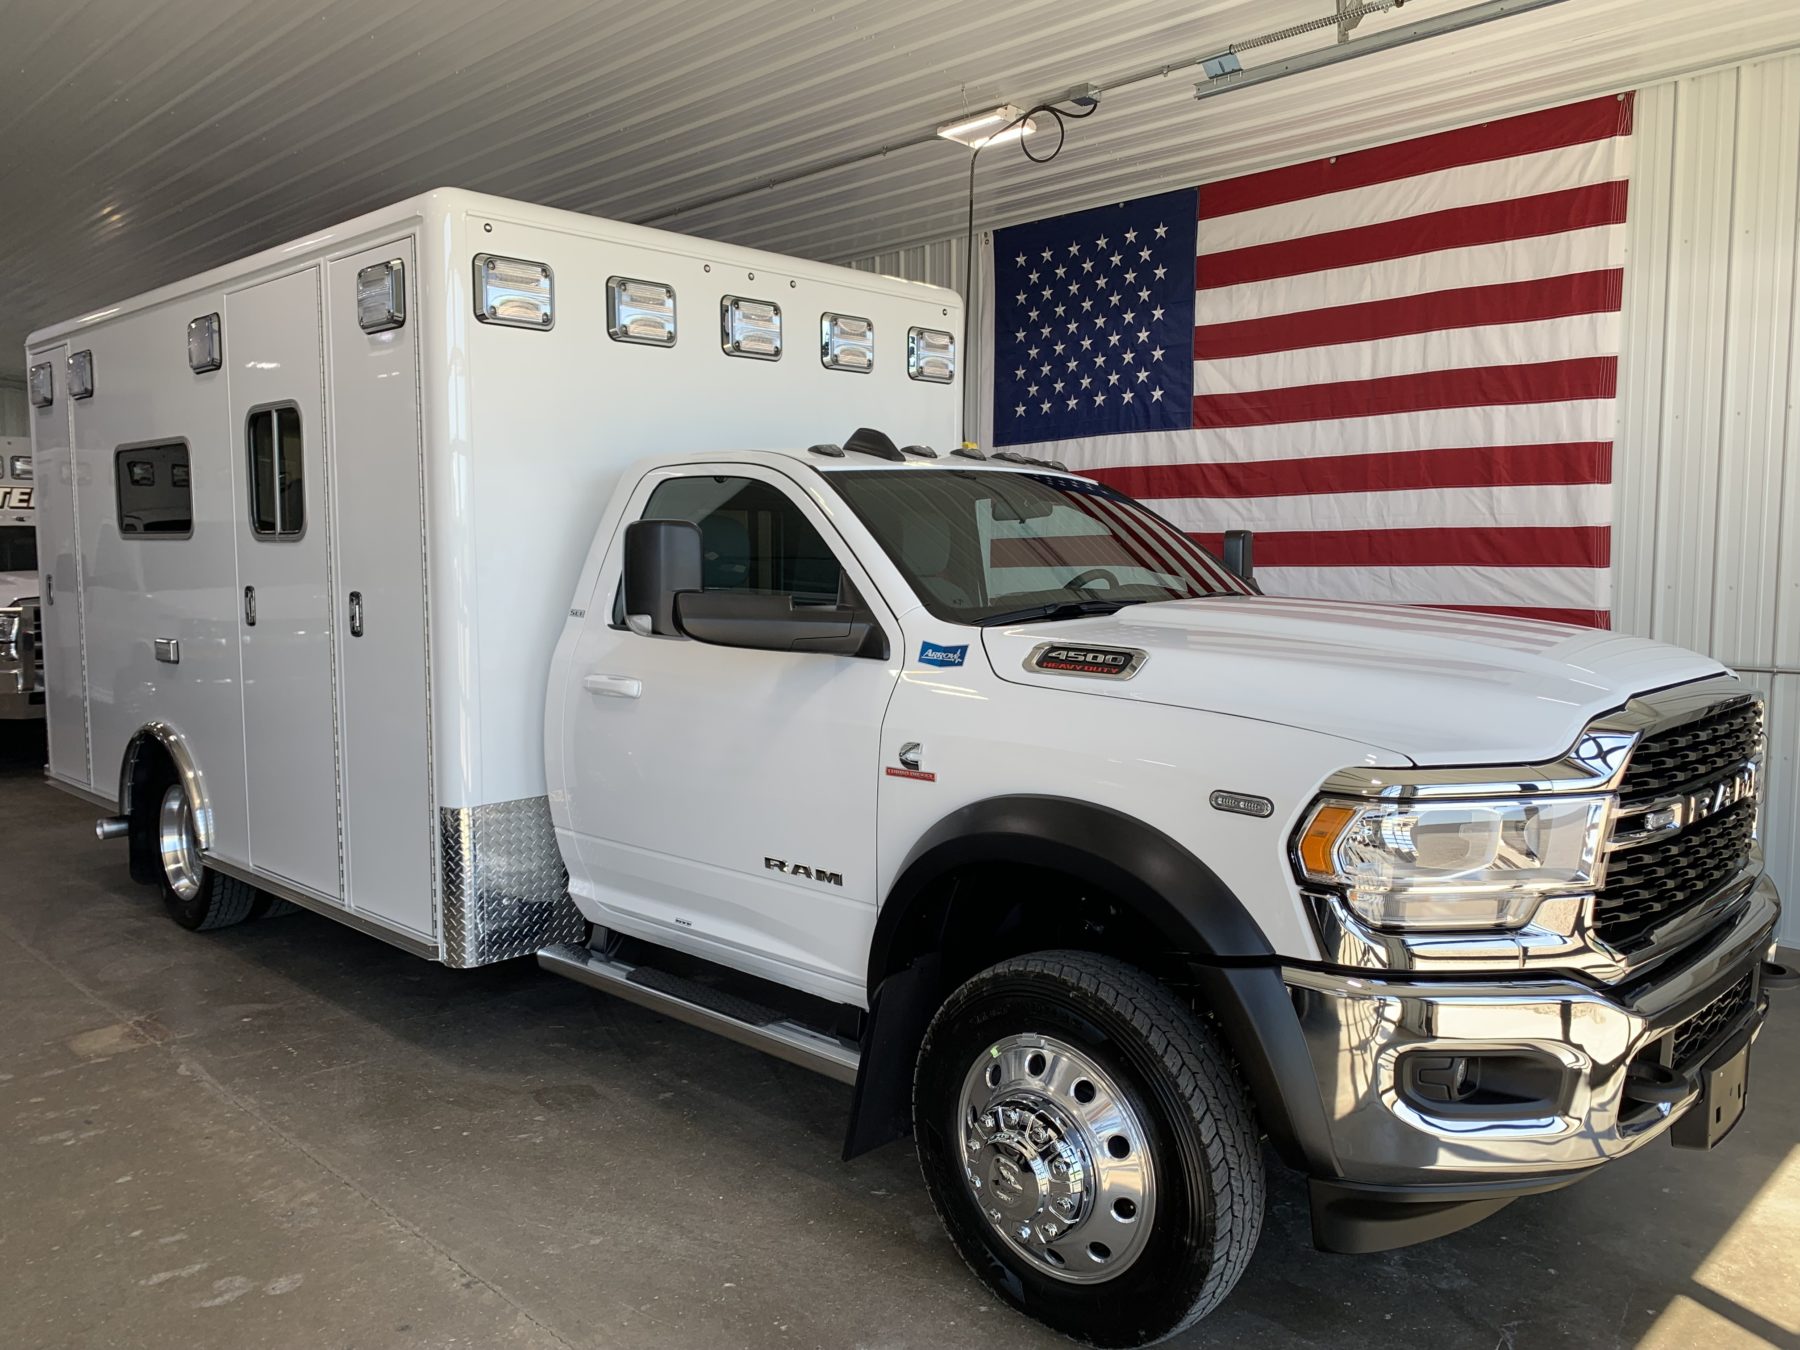 2022 Ram 4500 4x4 Heavy Duty Ambulance For Sale – Picture 1